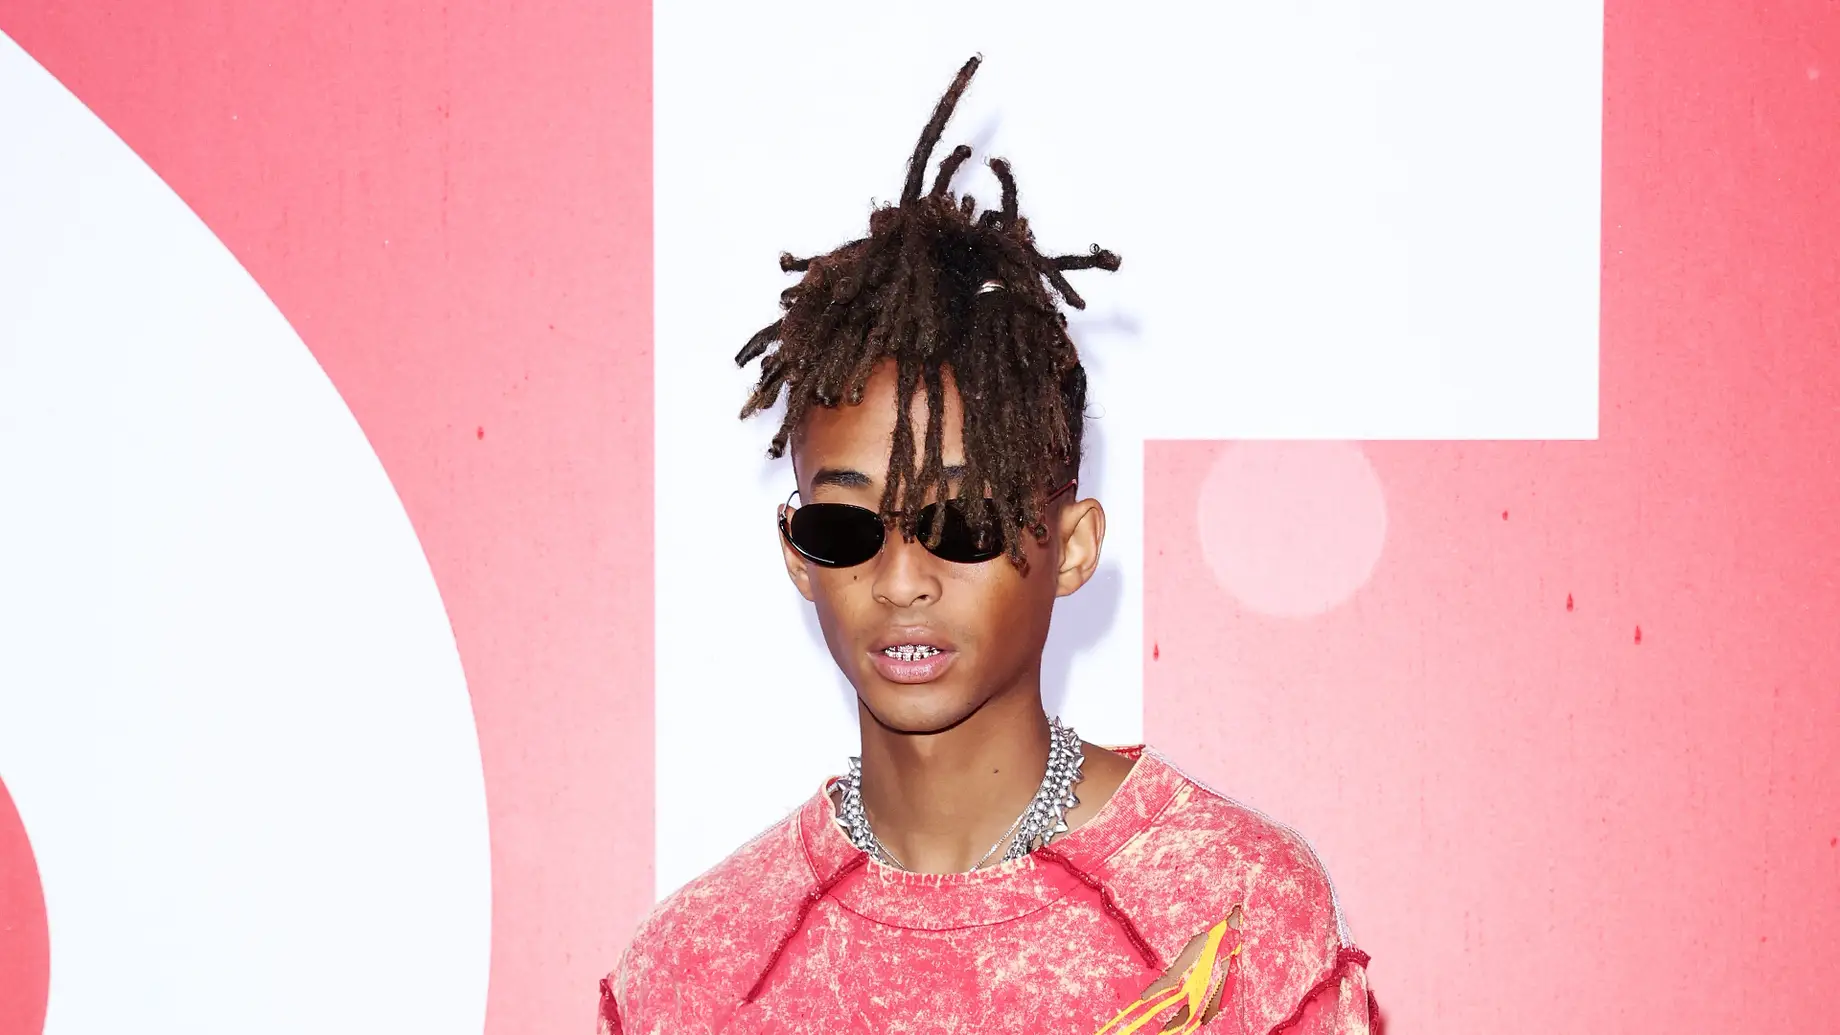 Bulked Up Jaden Smith Calls Out ‘Haters’ Who Only Post His Skinny Photos: ‘Damn Can a Man Have His Phases’ [Photo]